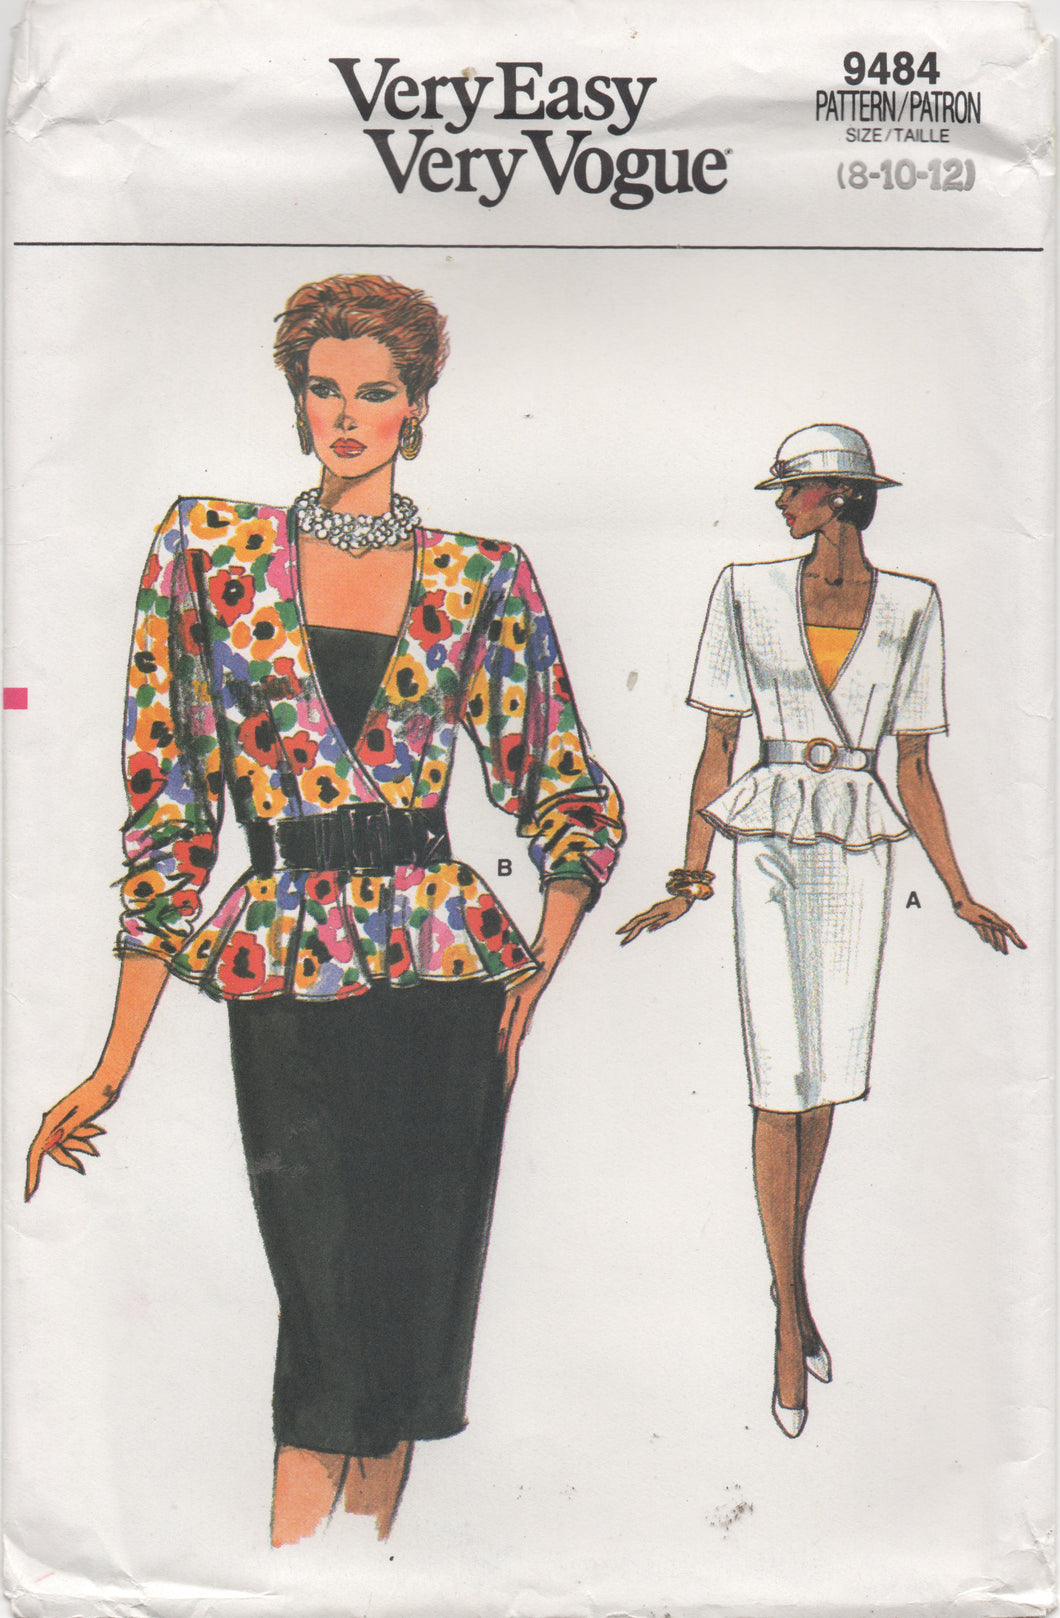 1980's Vogue Peplum Top with deep V, Camisole, and Pencil Skirt - Bust 31.5-32.5-34